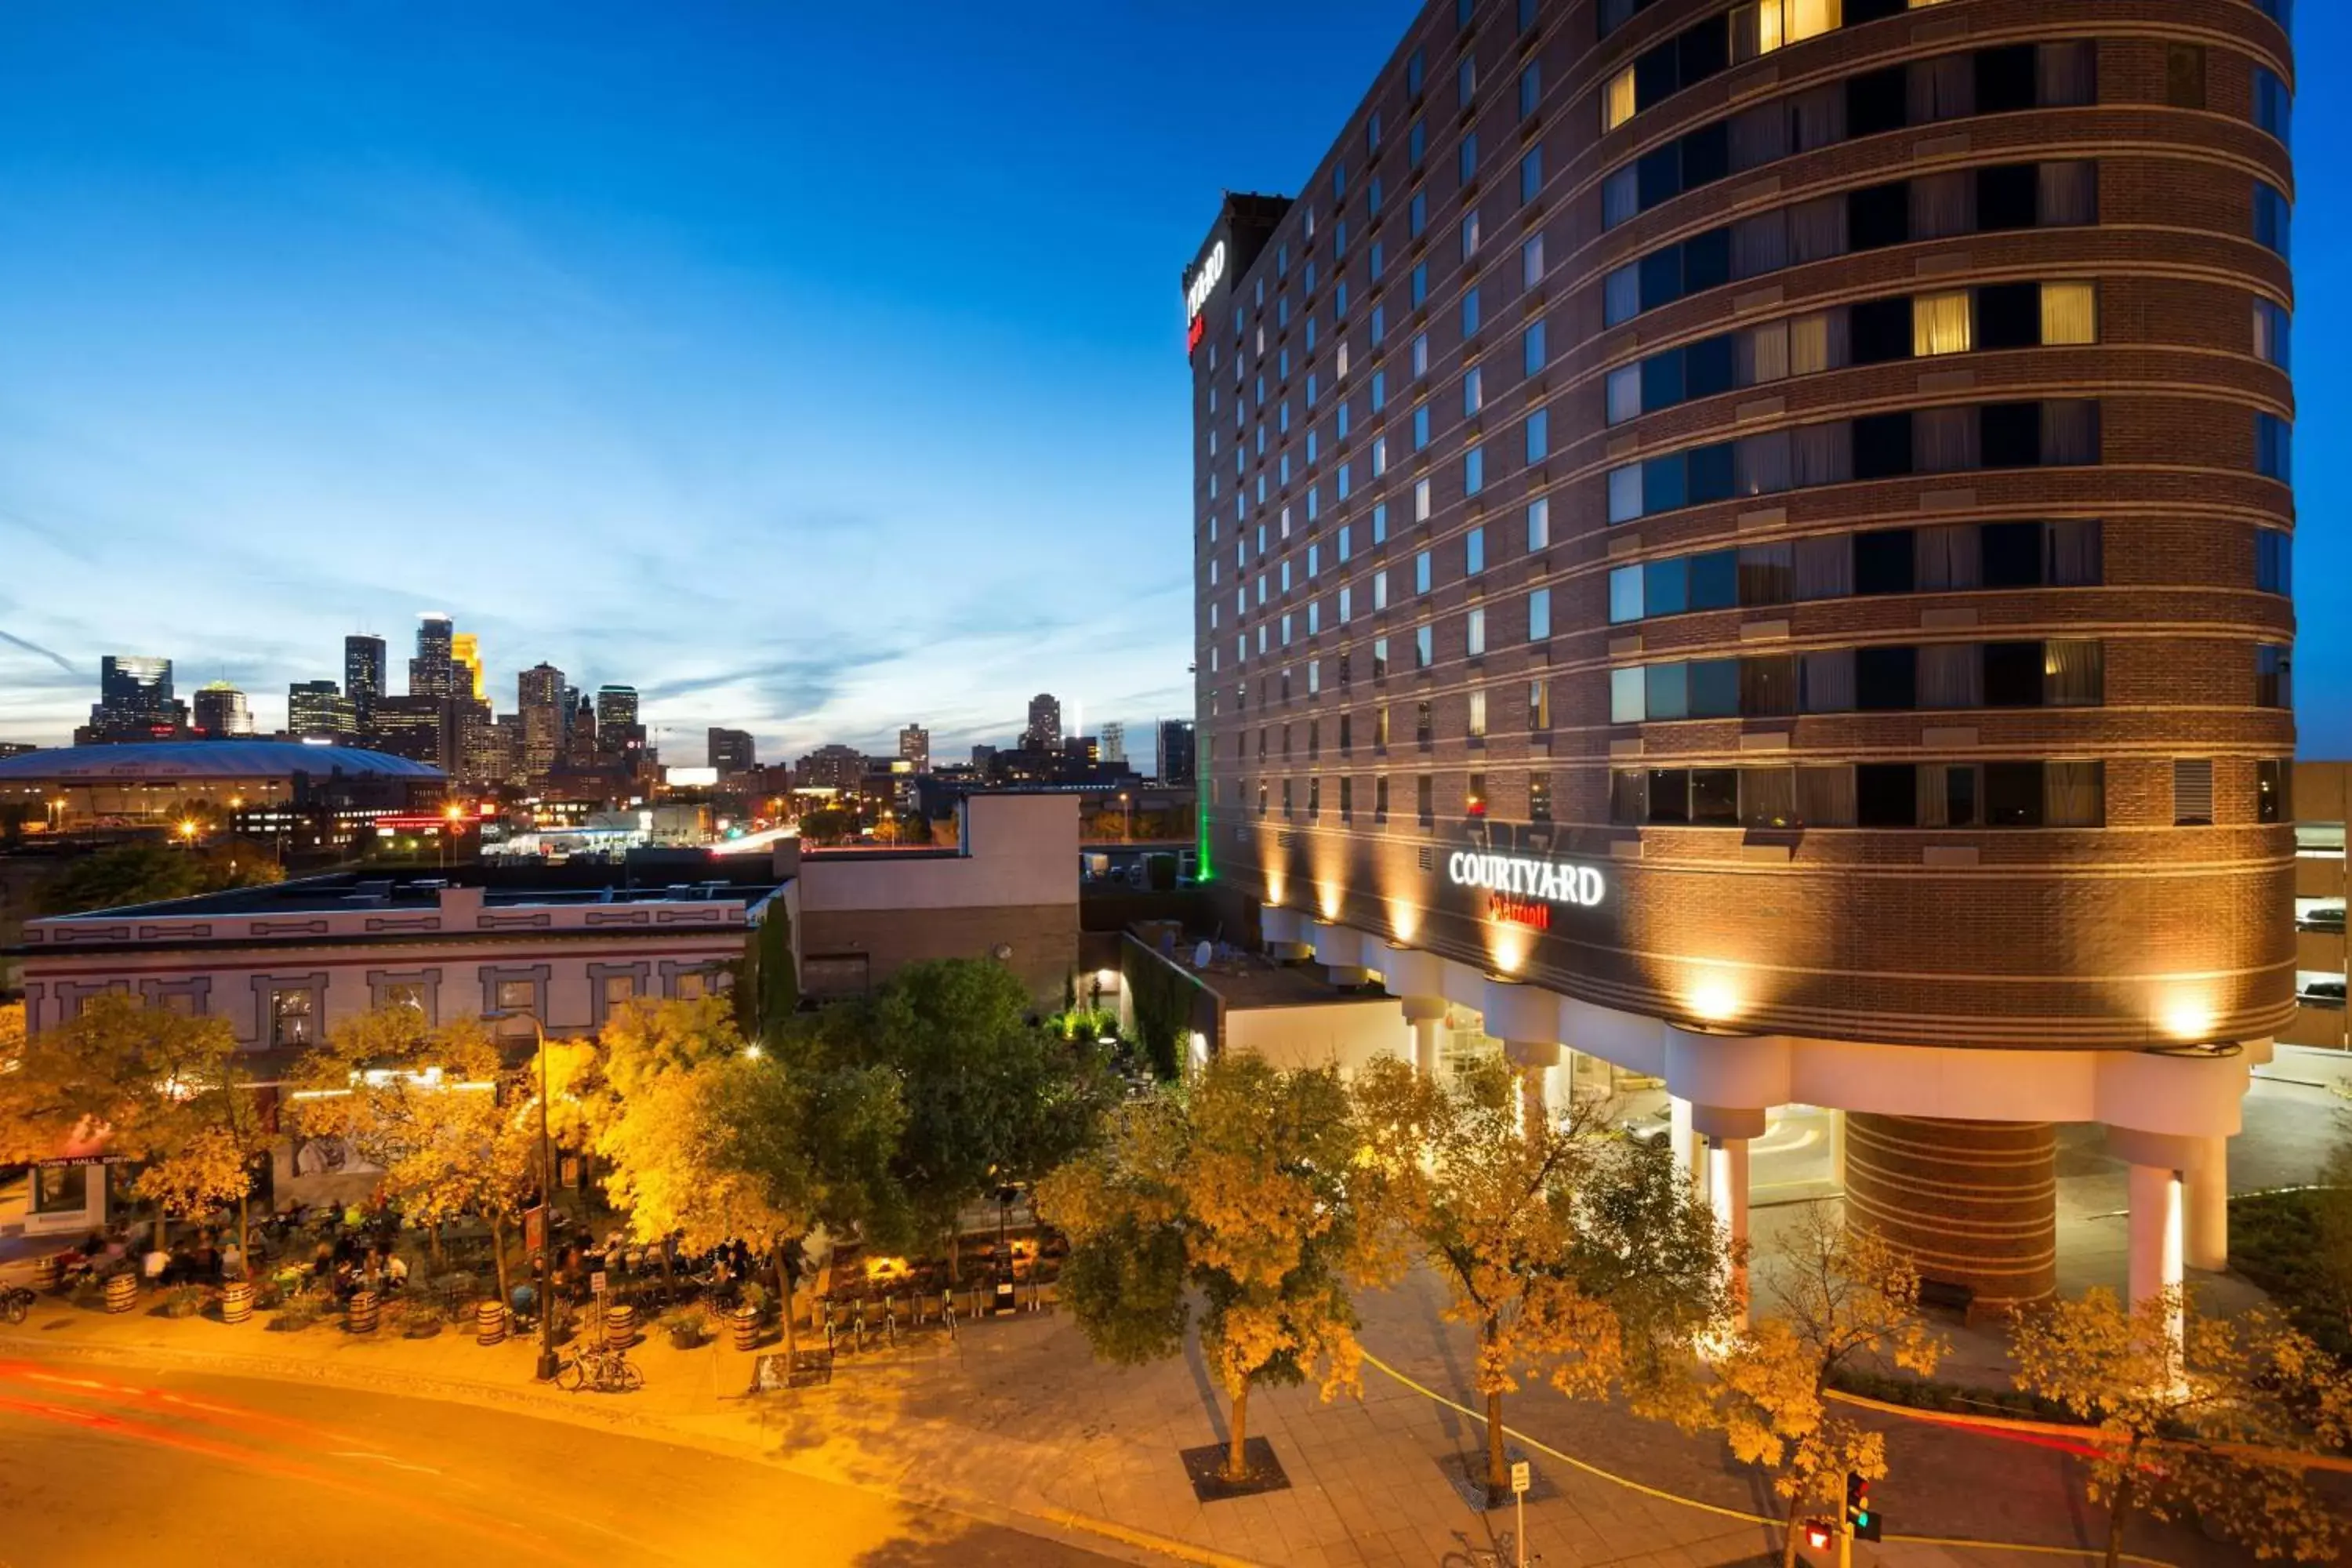 Property building in Courtyard by Marriott Minneapolis Downtown